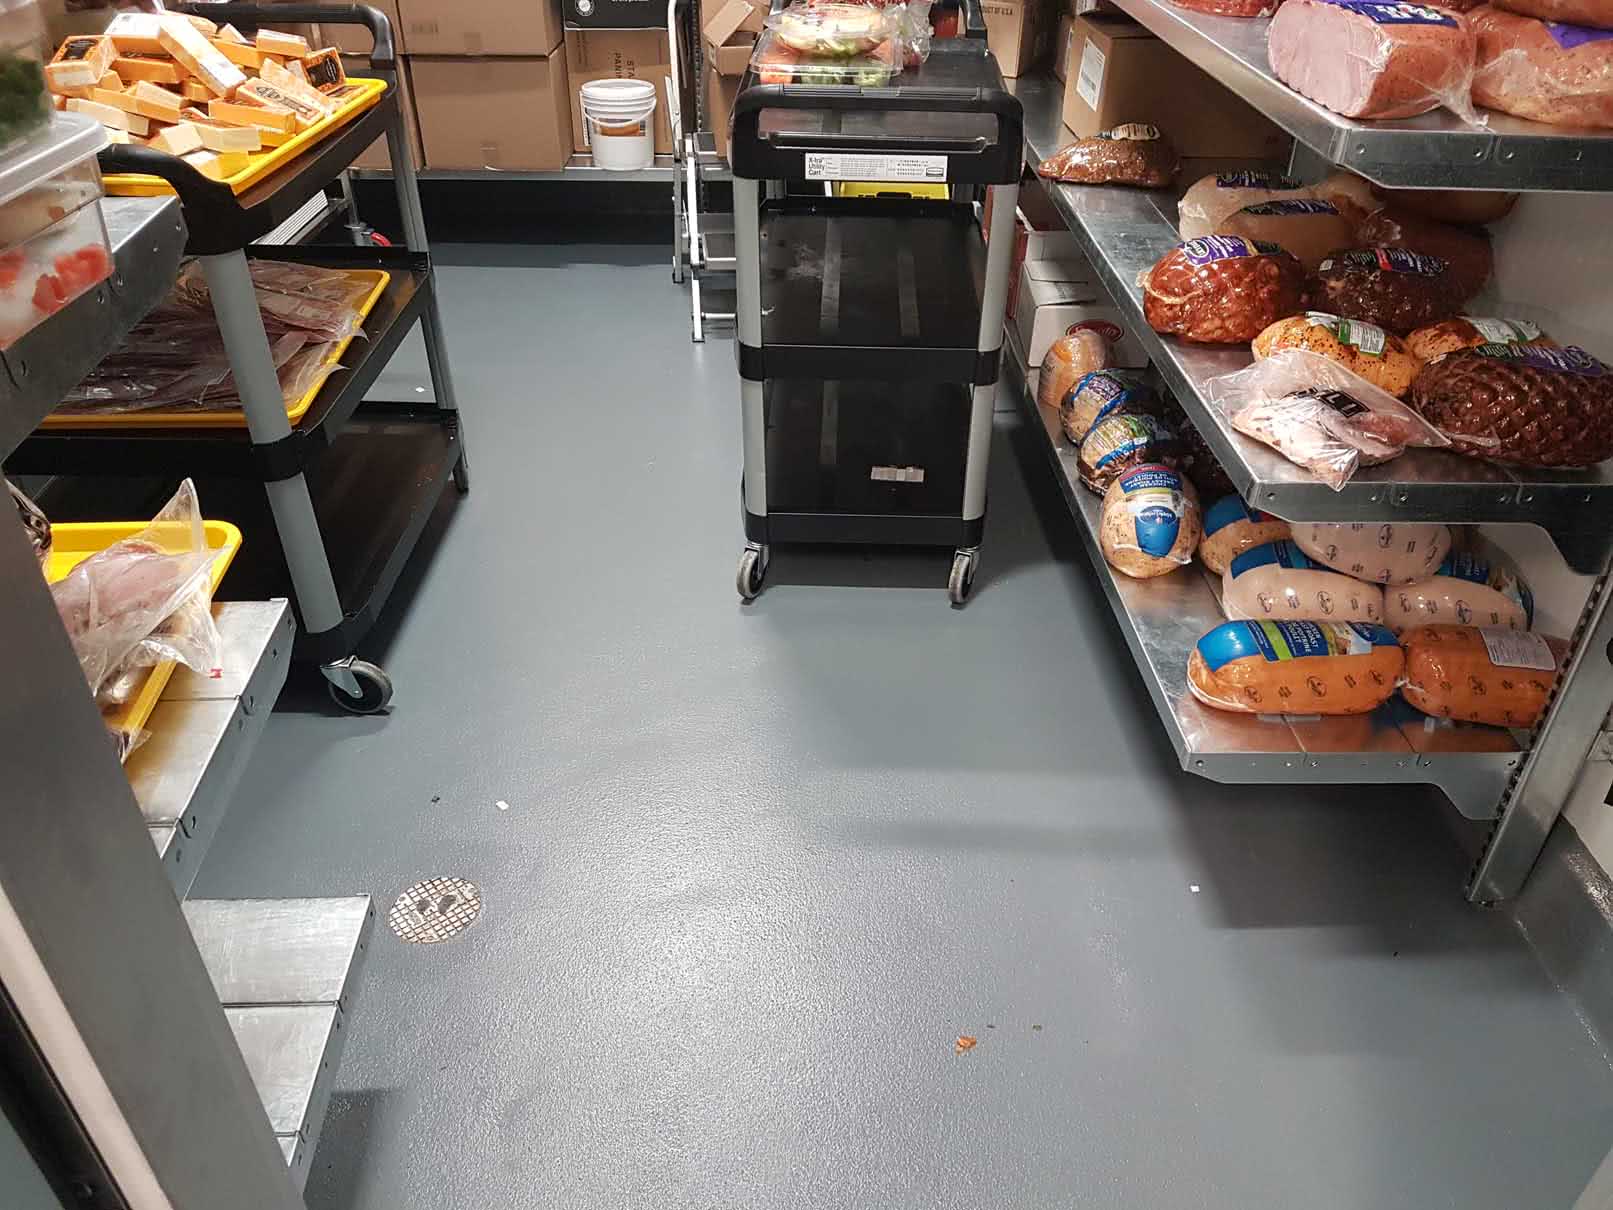 Concrete floor resurfacing for Save on Foods